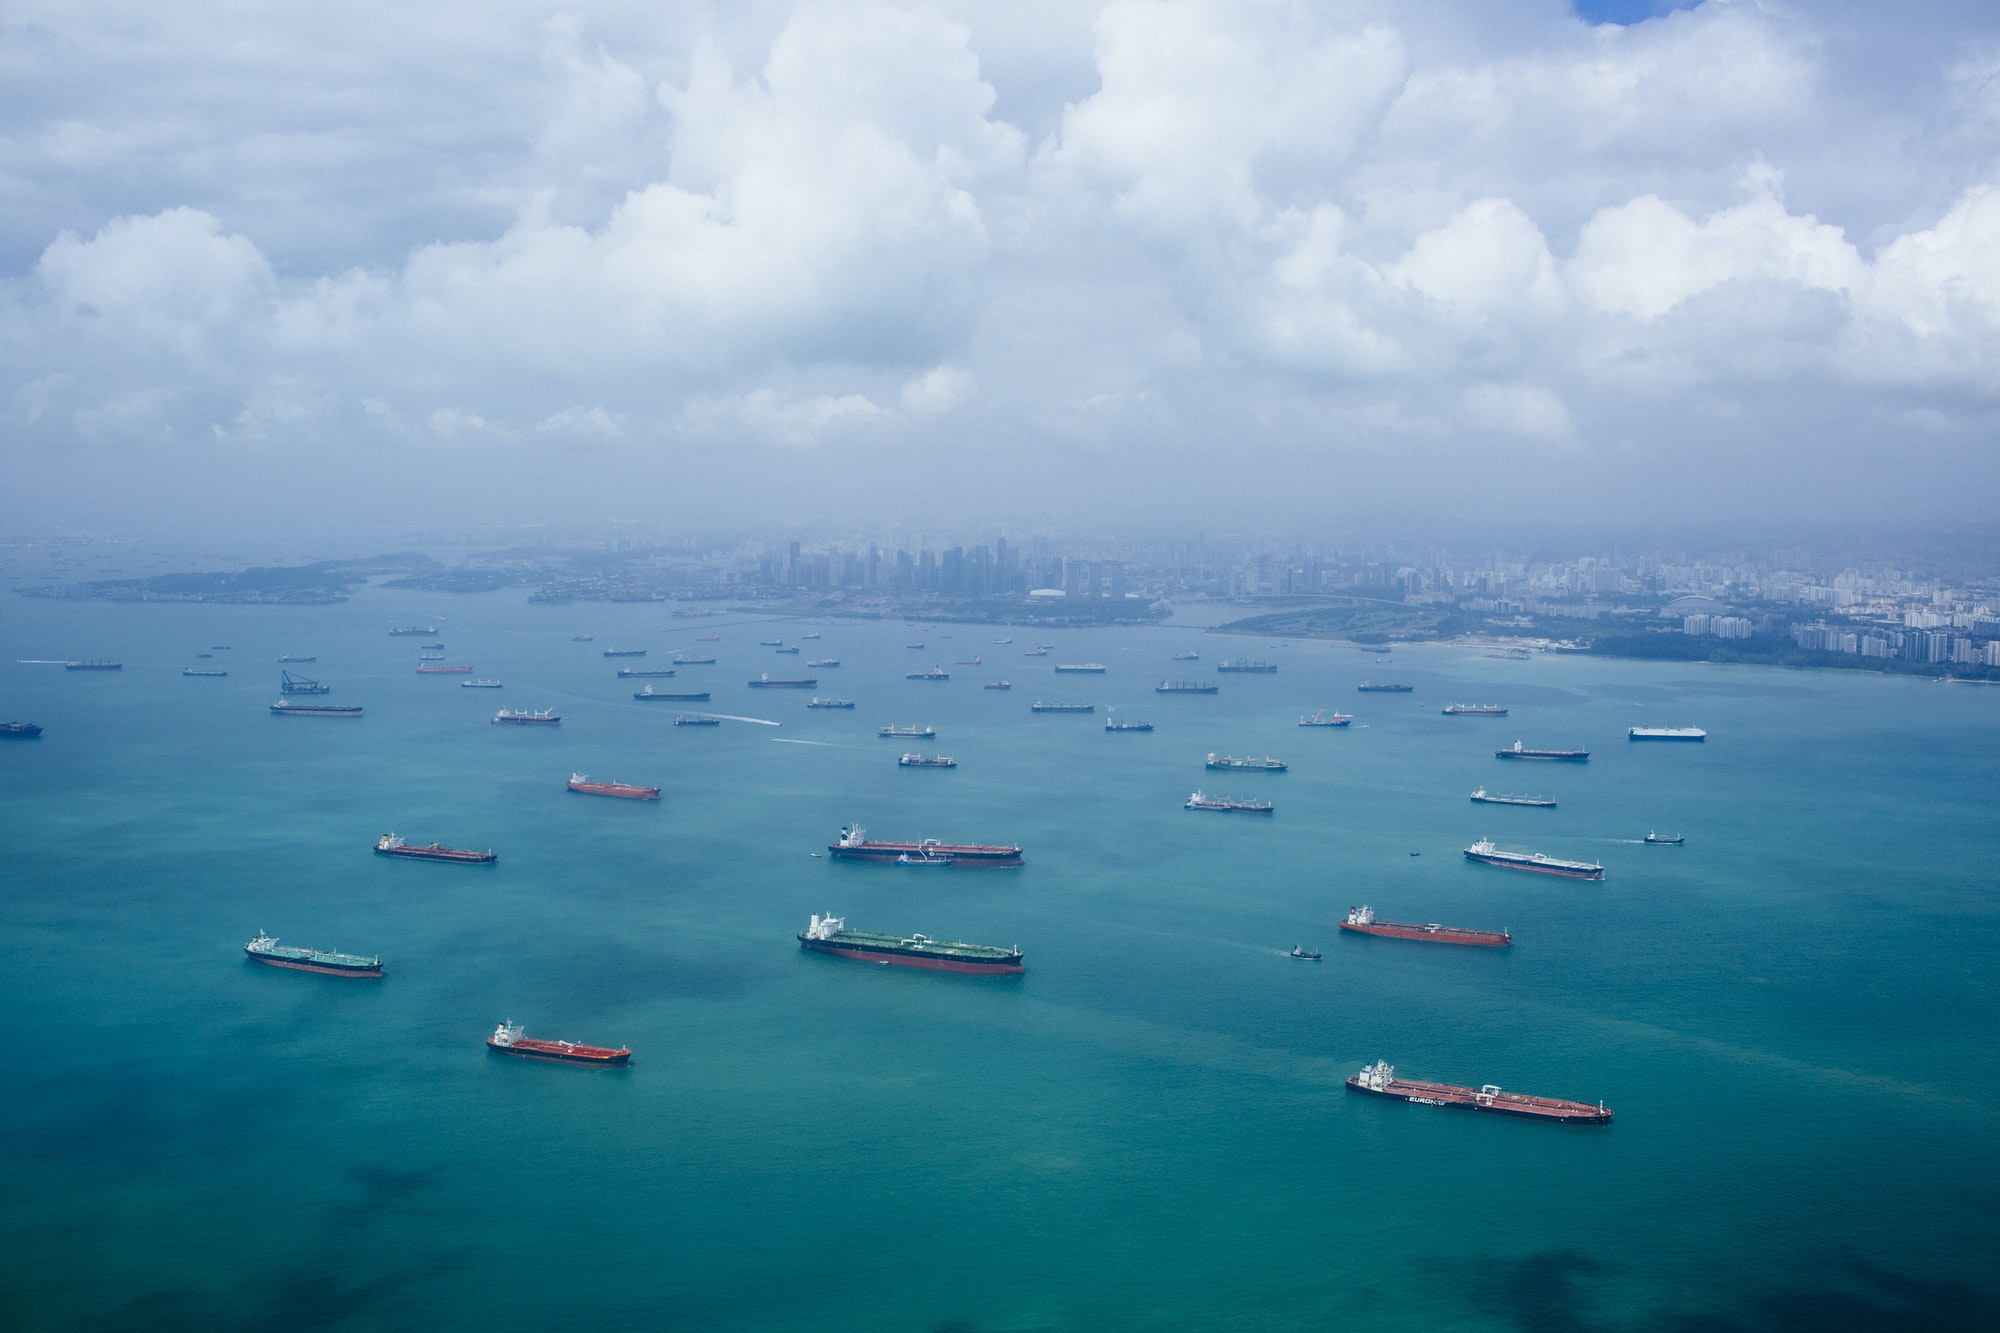 High angle view of barges and cargo ships in a bay, cityscape in the distance.